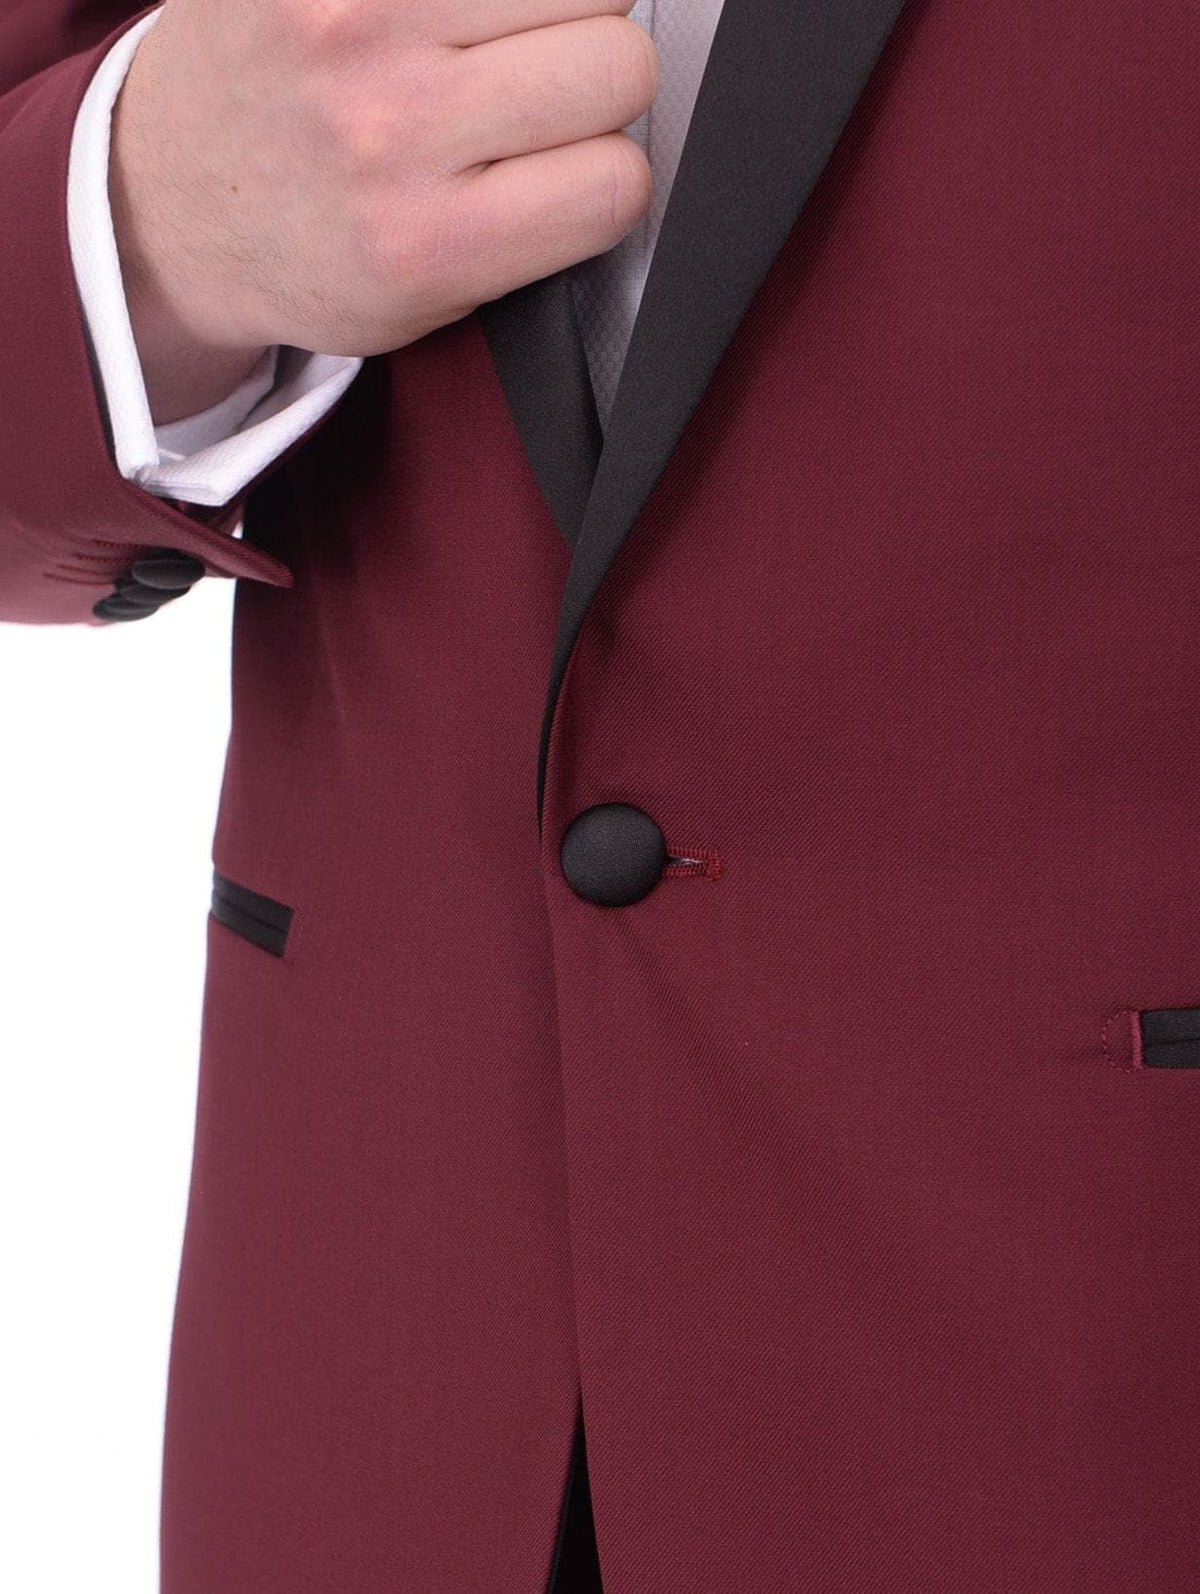 Gino Vitale TUXEDOS Gino Vitale Slim Fit Solid Burgundy One Button Tuxedo Suit With Shawl Lapel